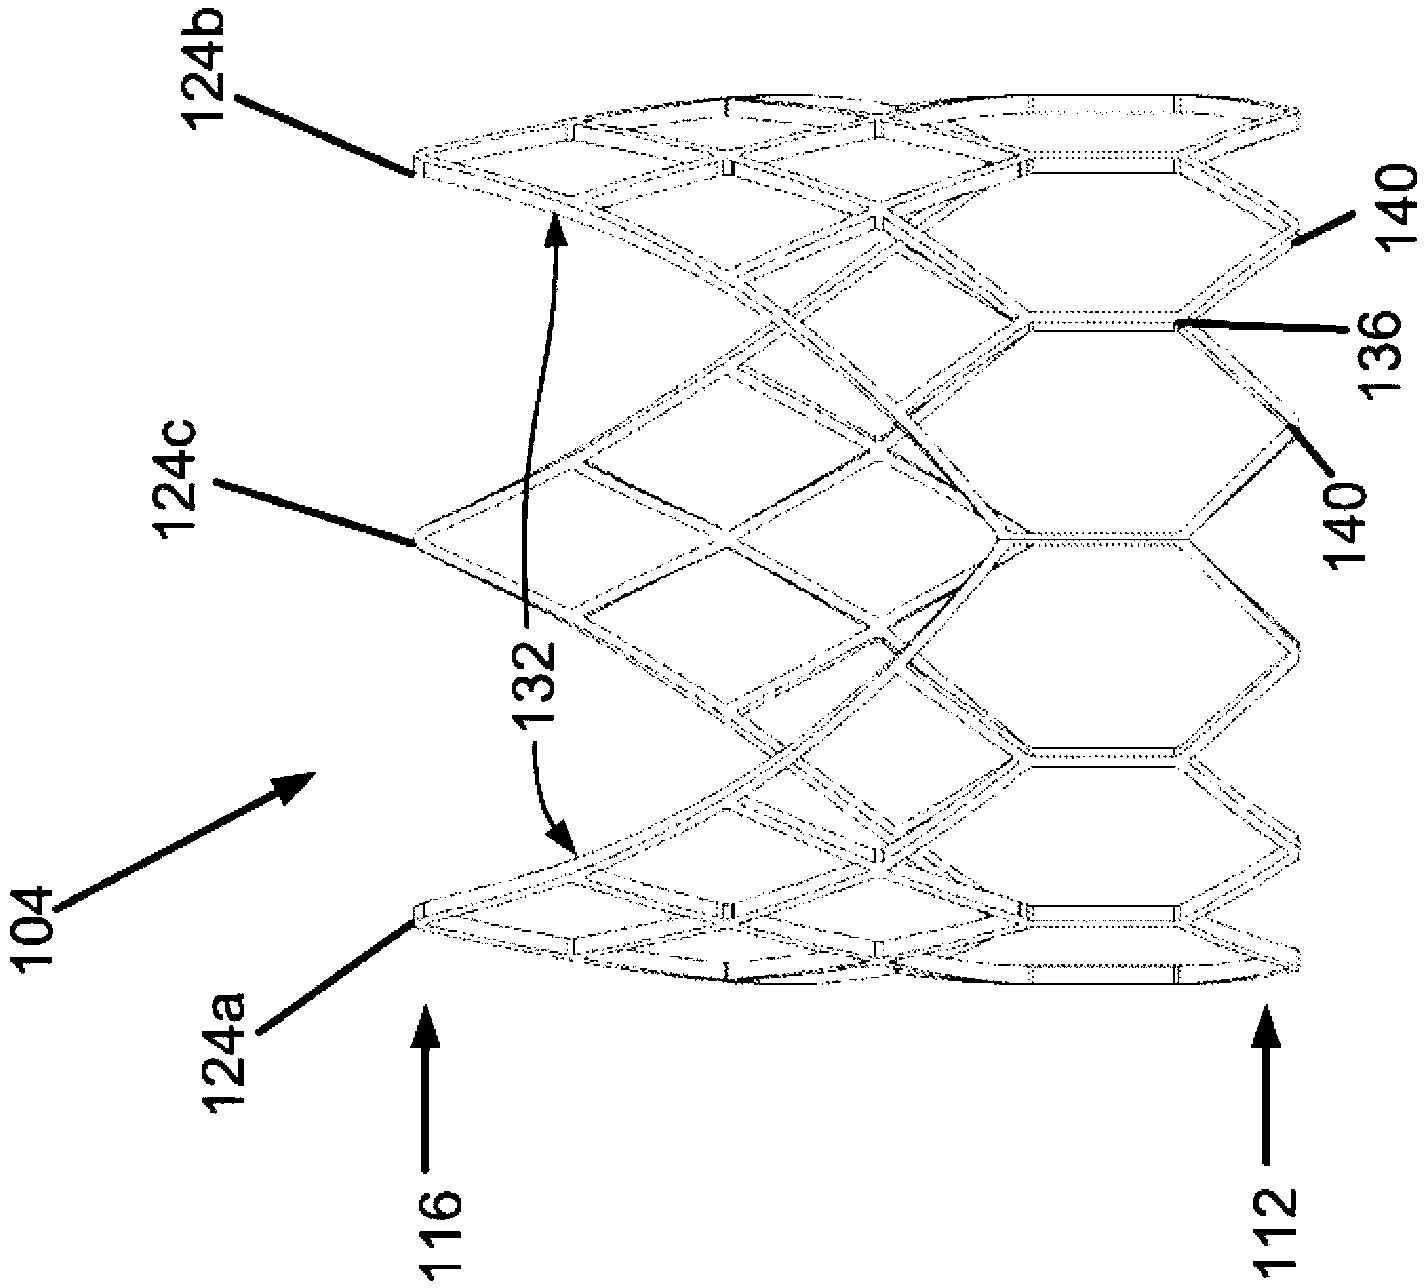 Percutaneously deliverable heart or blood vessel valve with frame having abluminally situated tissue membrane